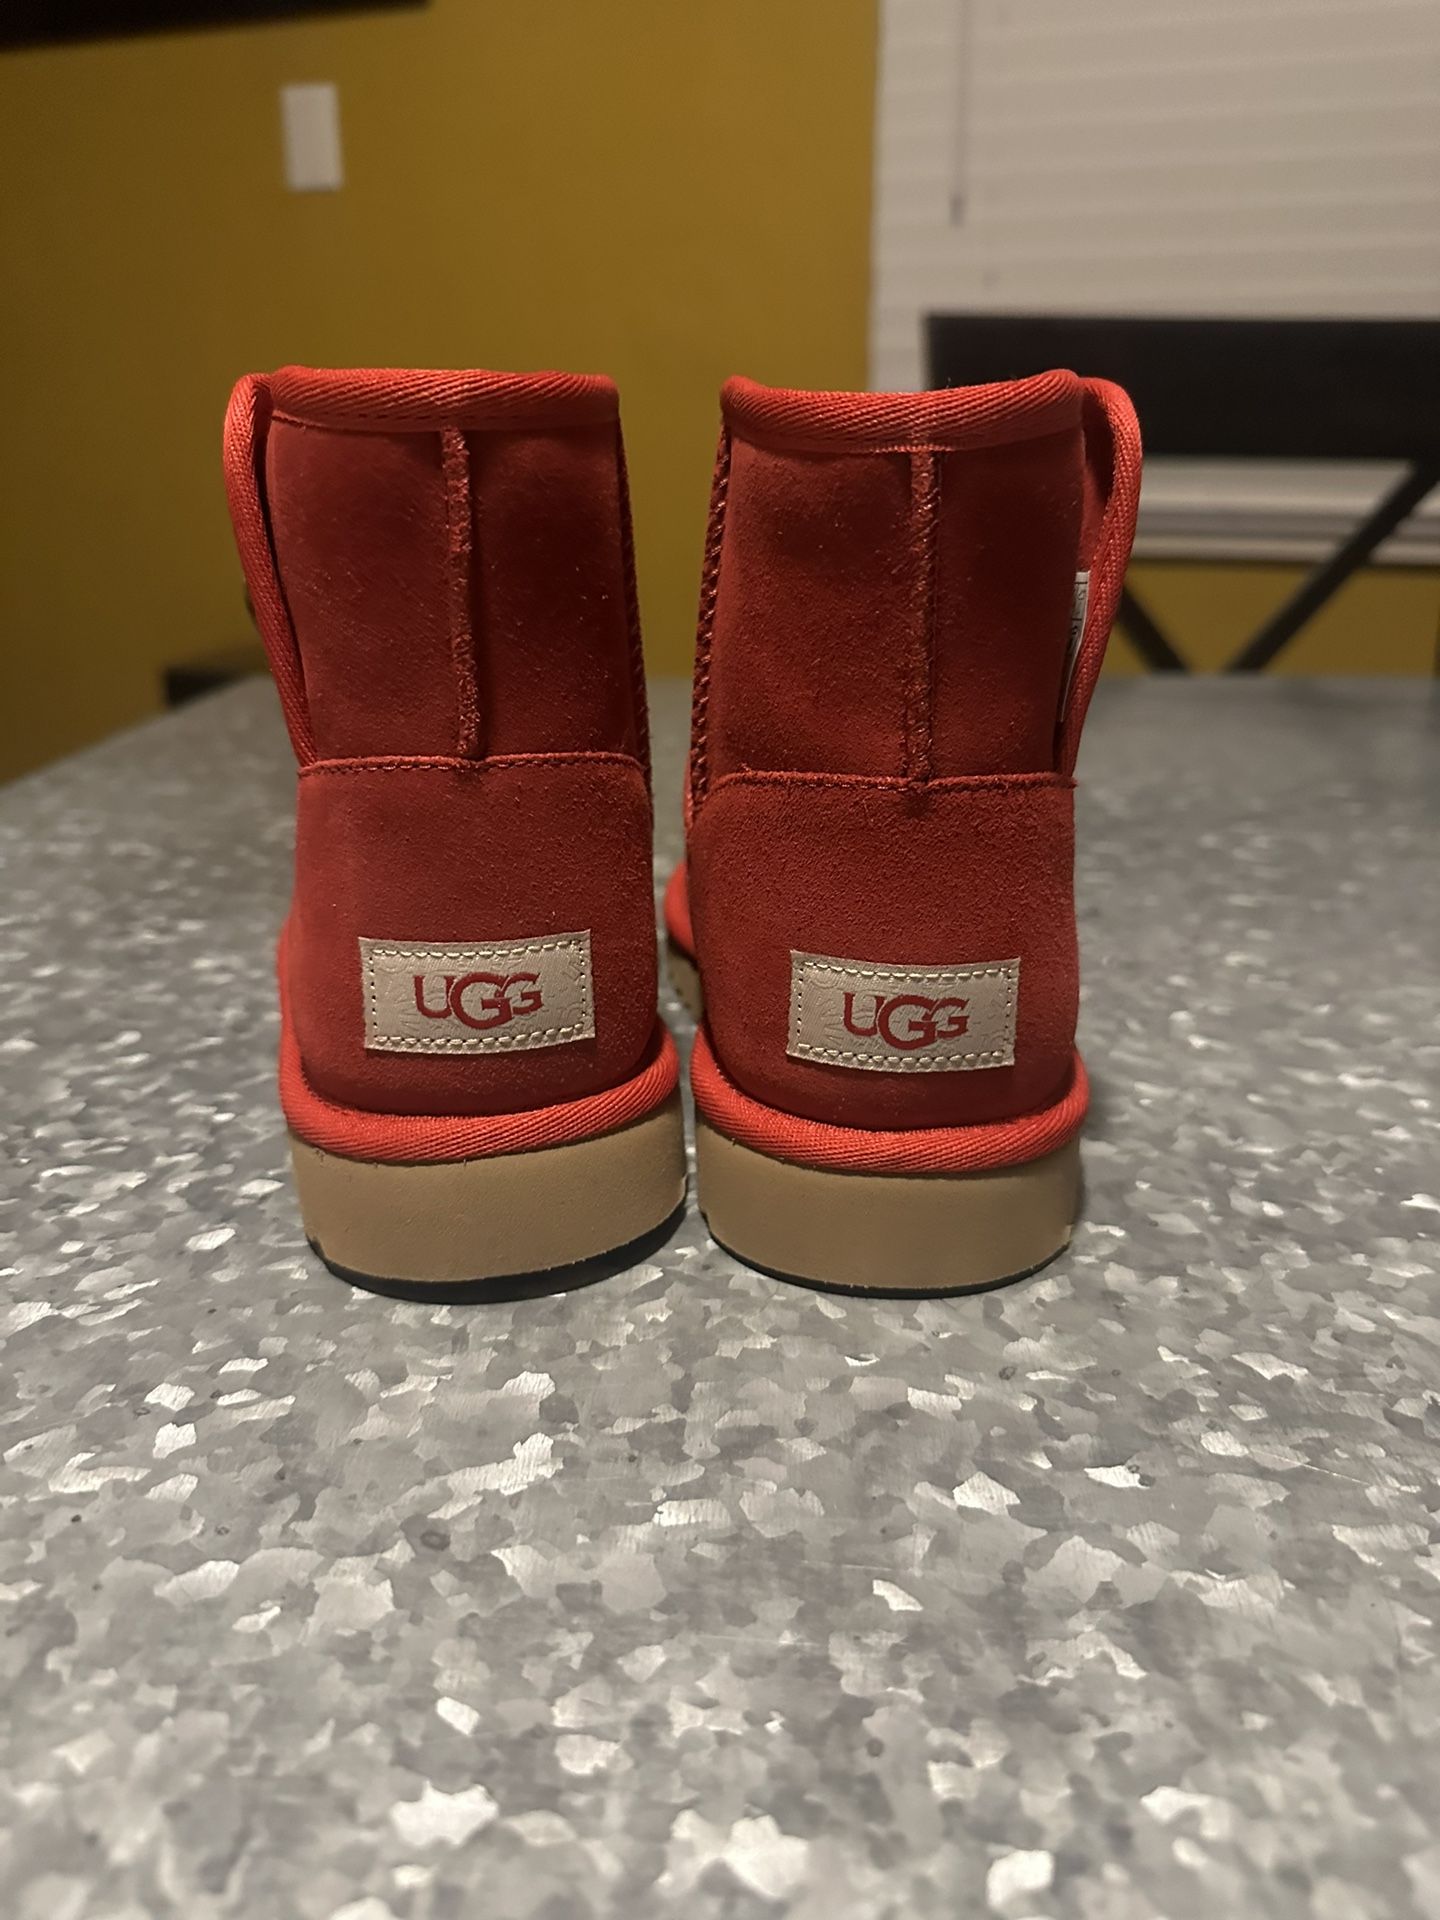 New Girls Red Ugg Boots Size 3 